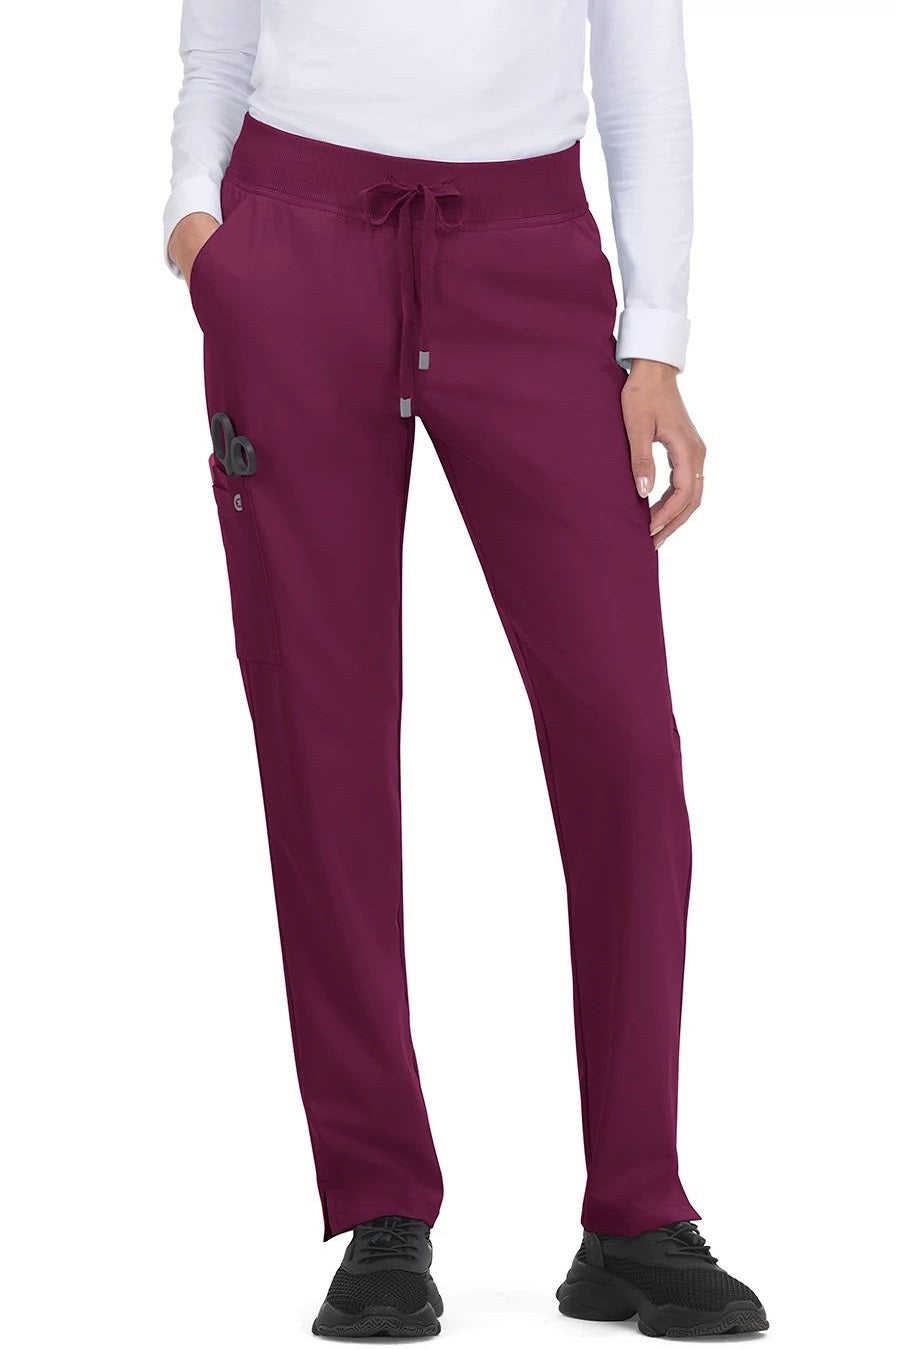 koi Scrub Pants Cureology Atria in Petite Wine at Parker's Clothing and Shoes.